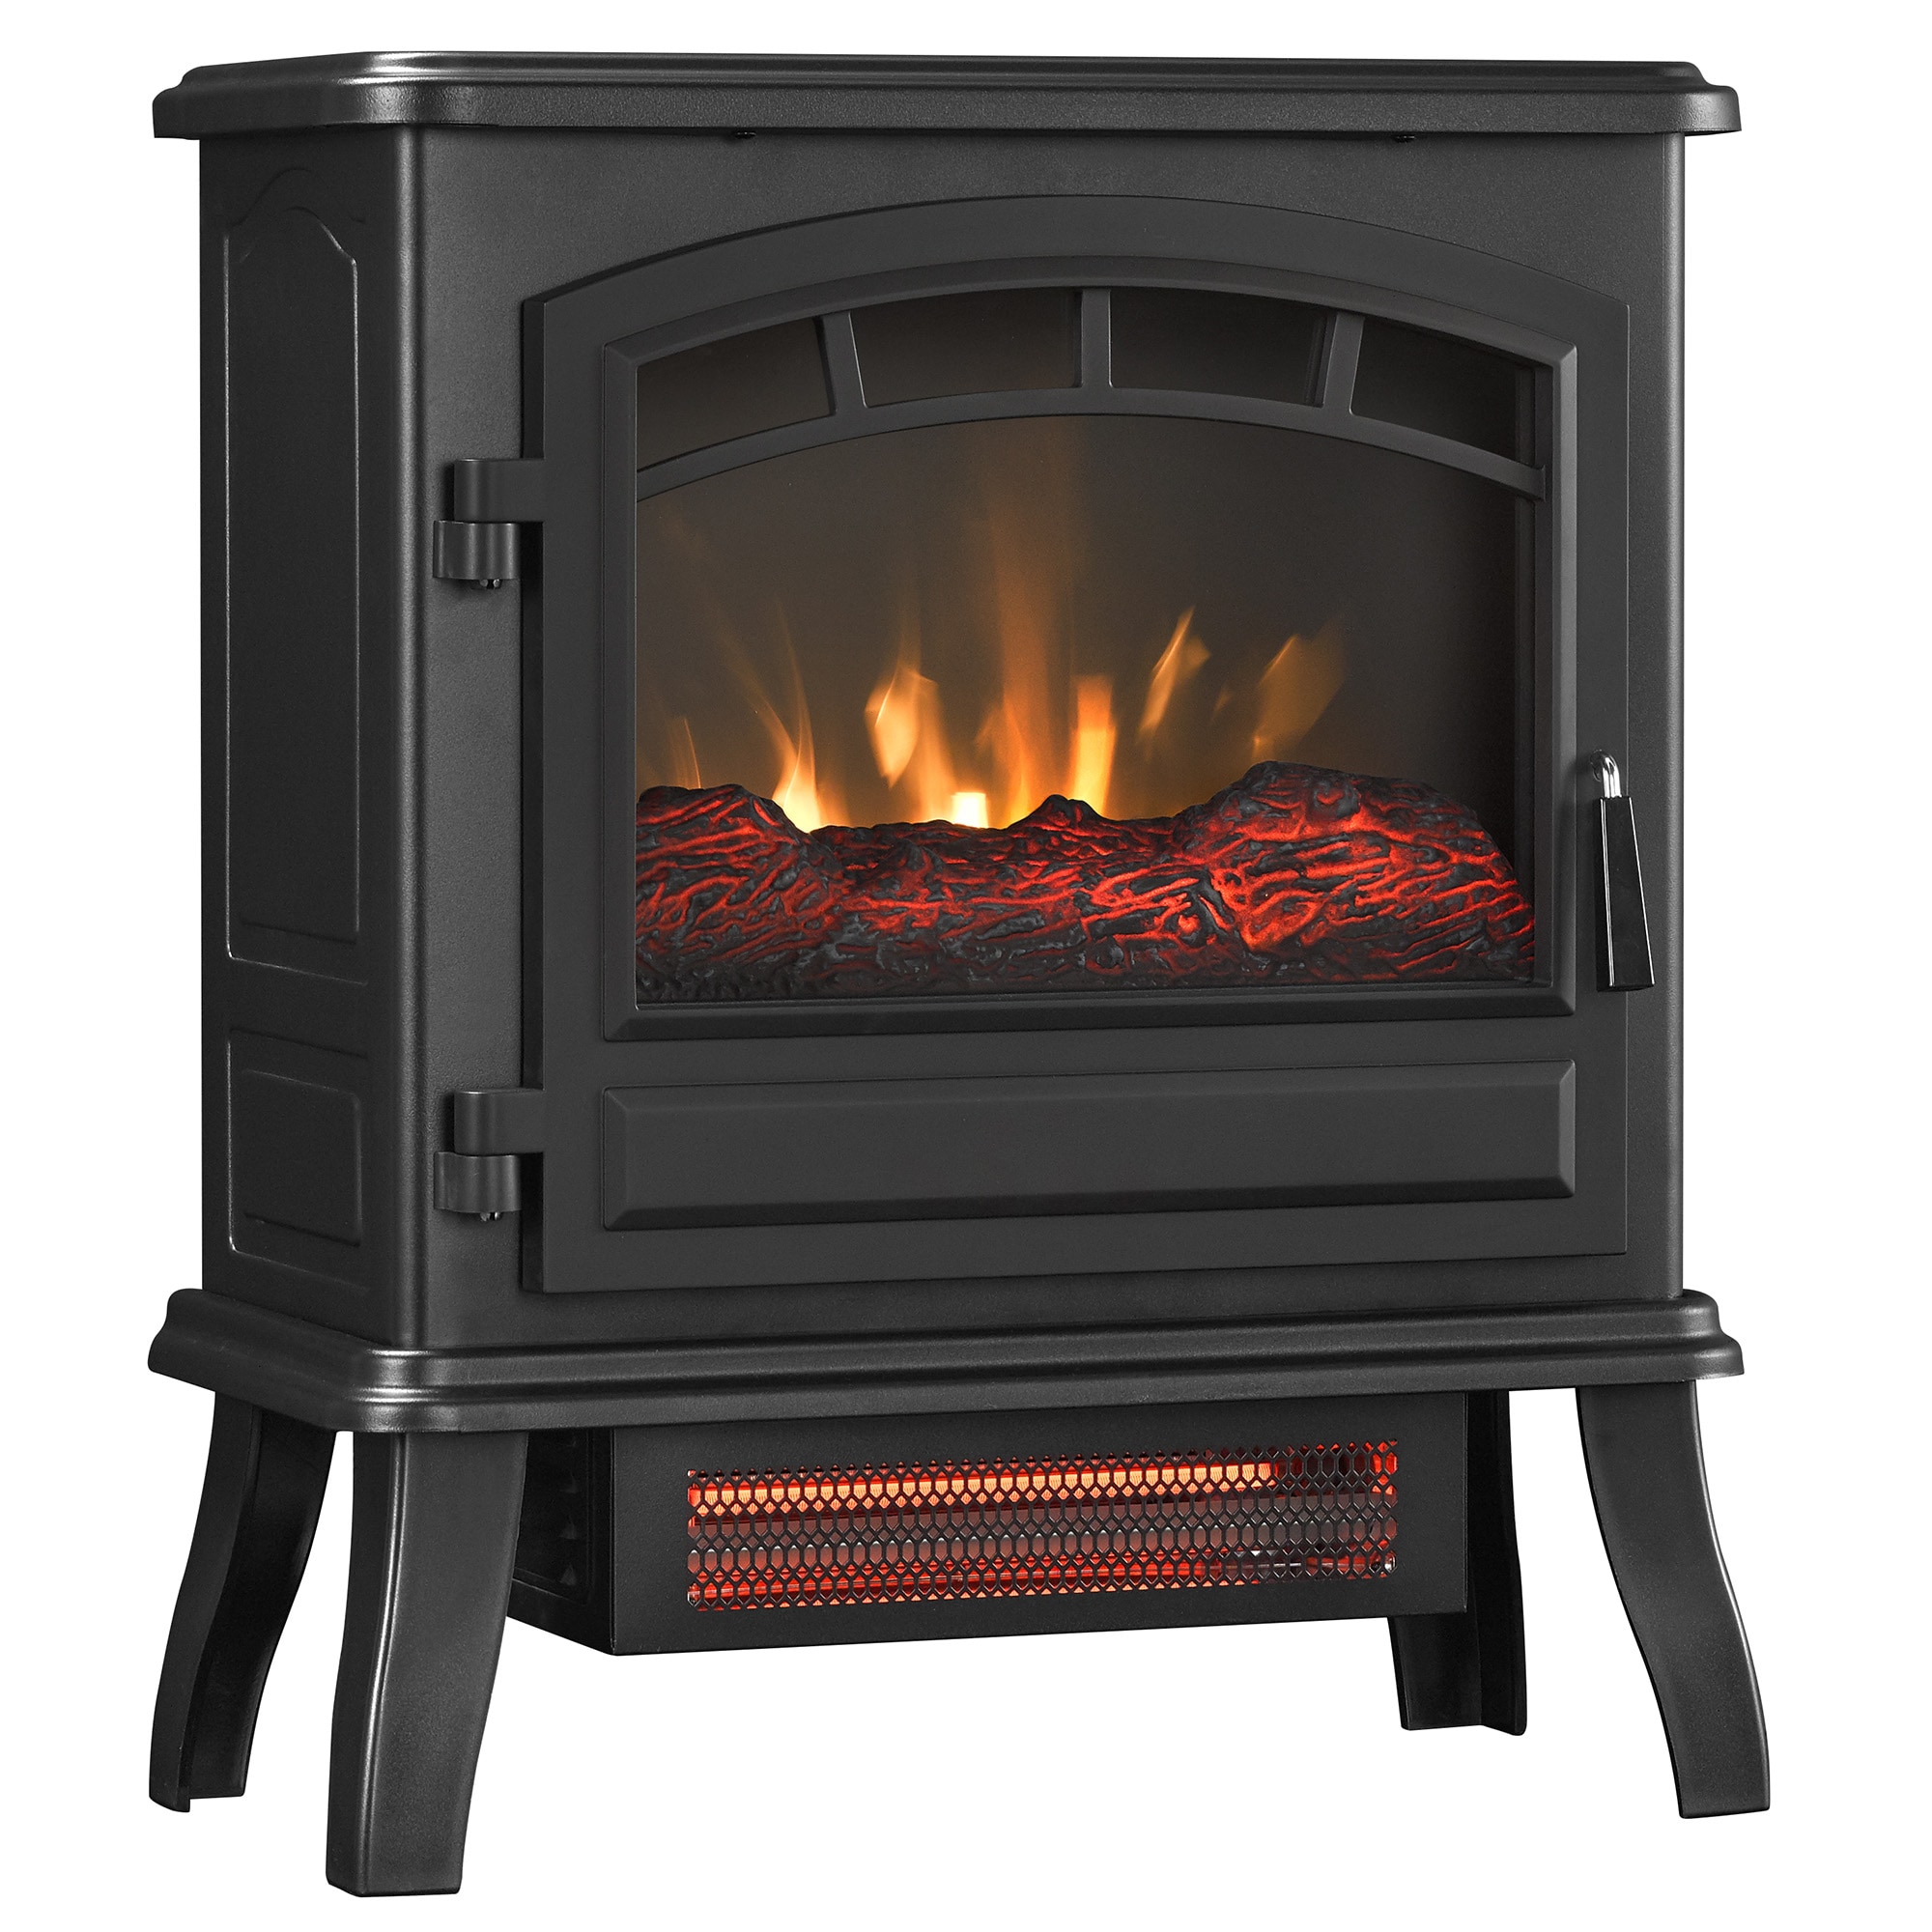 Freestanding Electric Stoves Buyer's Guide – Electric Fireplaces Direct